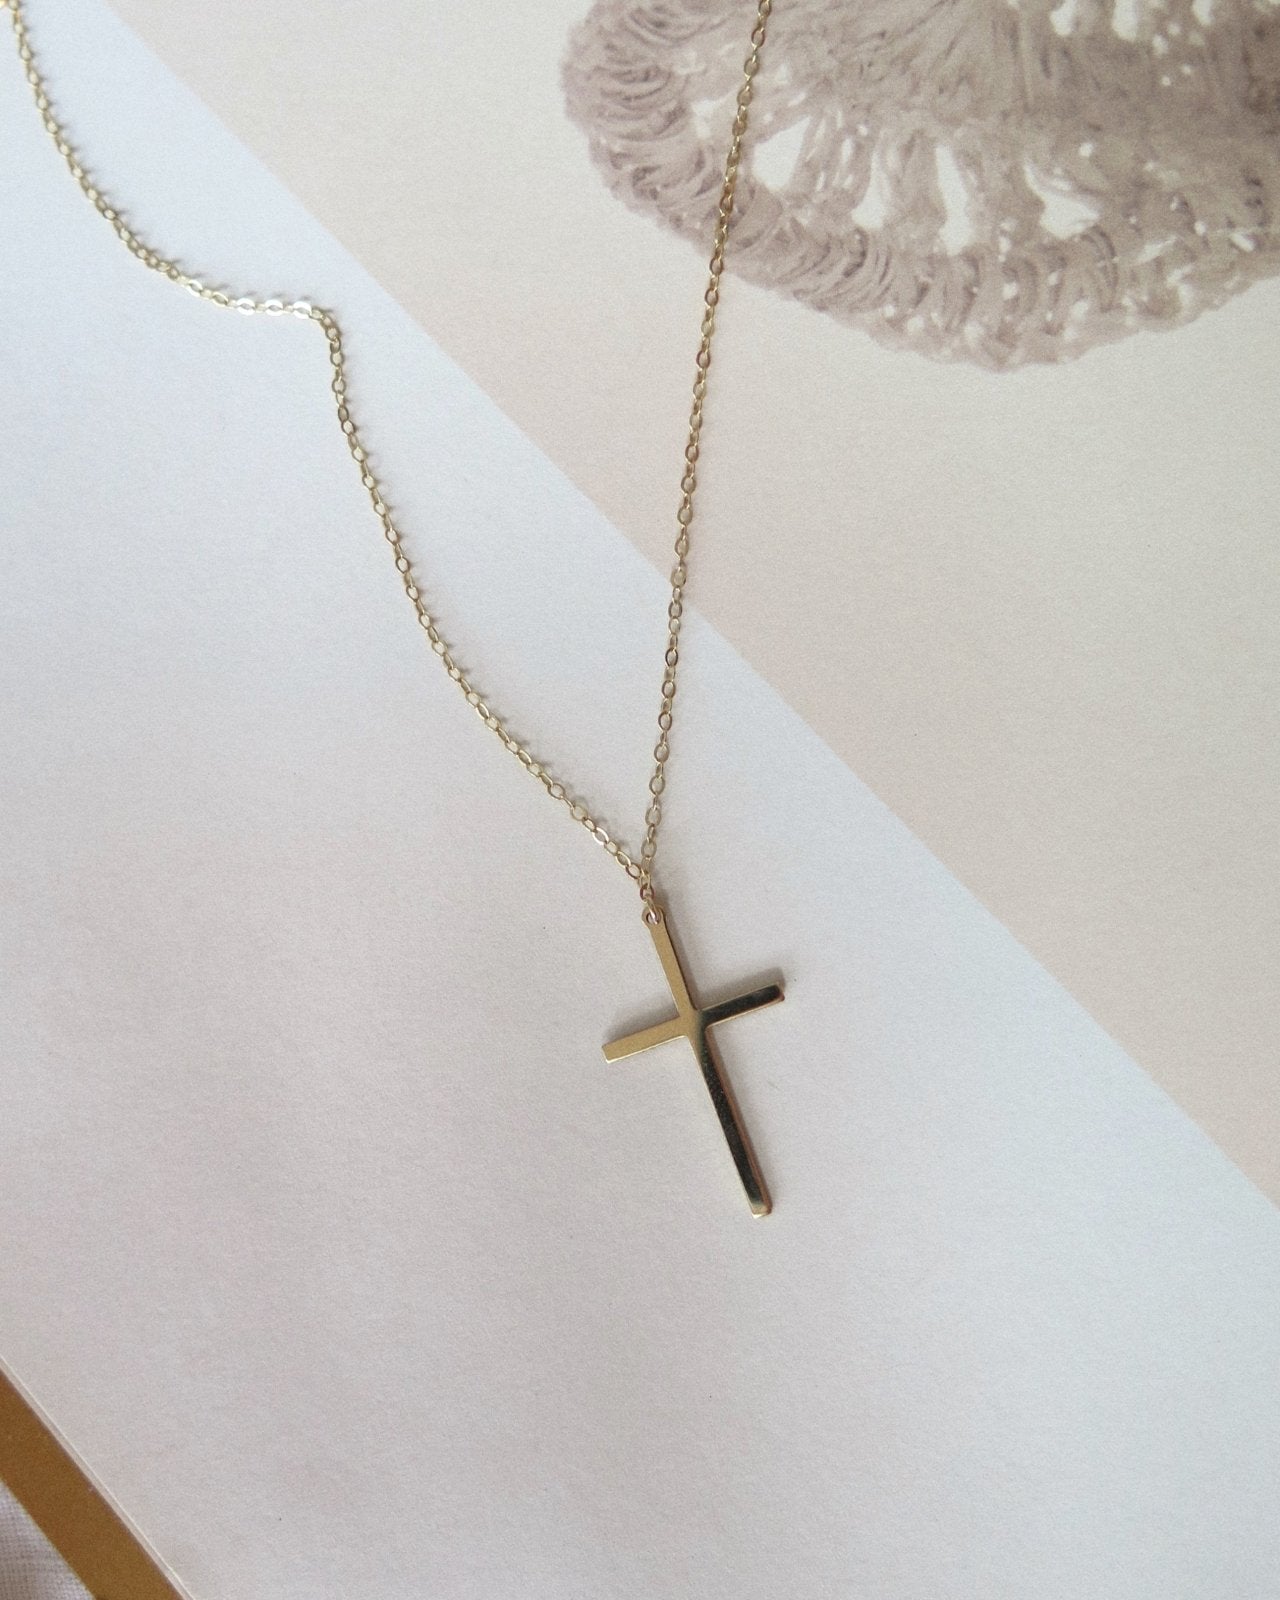 LARGE CROSS NECKLACE - The Littl - Deluxe Chain - 14k Yellow Gold Fill